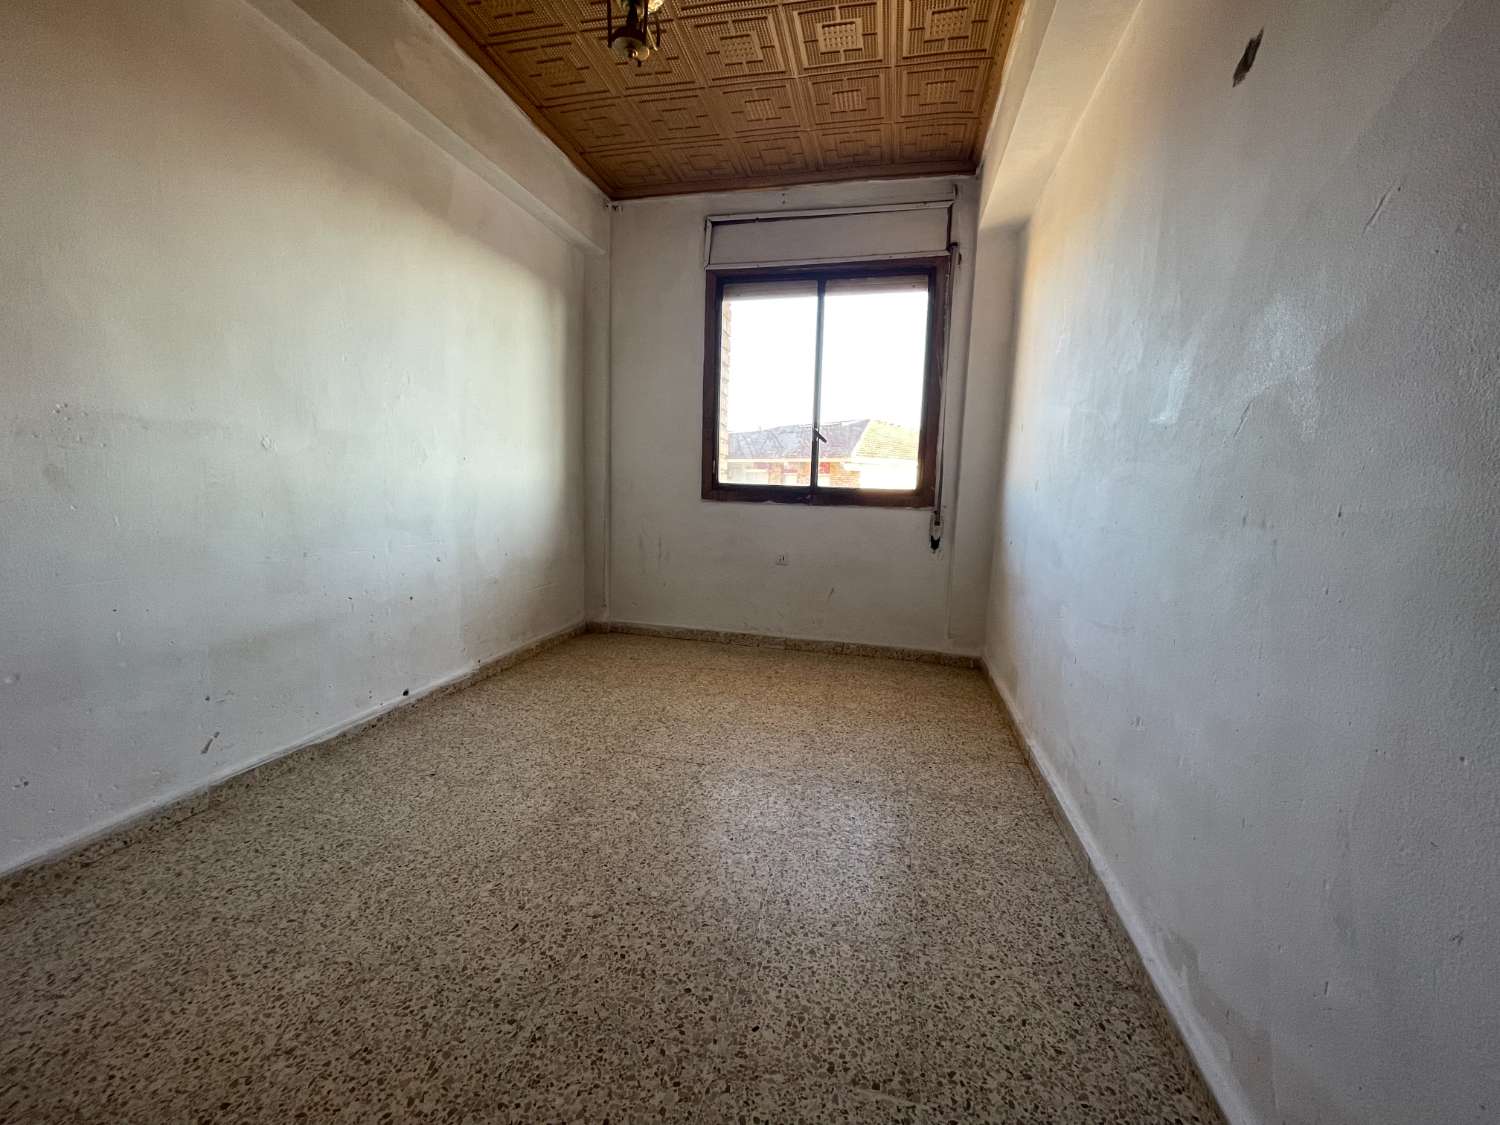 CHANCE!! APARTMENT TO REFORM, 3 BEDROOMS IN SAN PEDRO DEL PINATAR!!